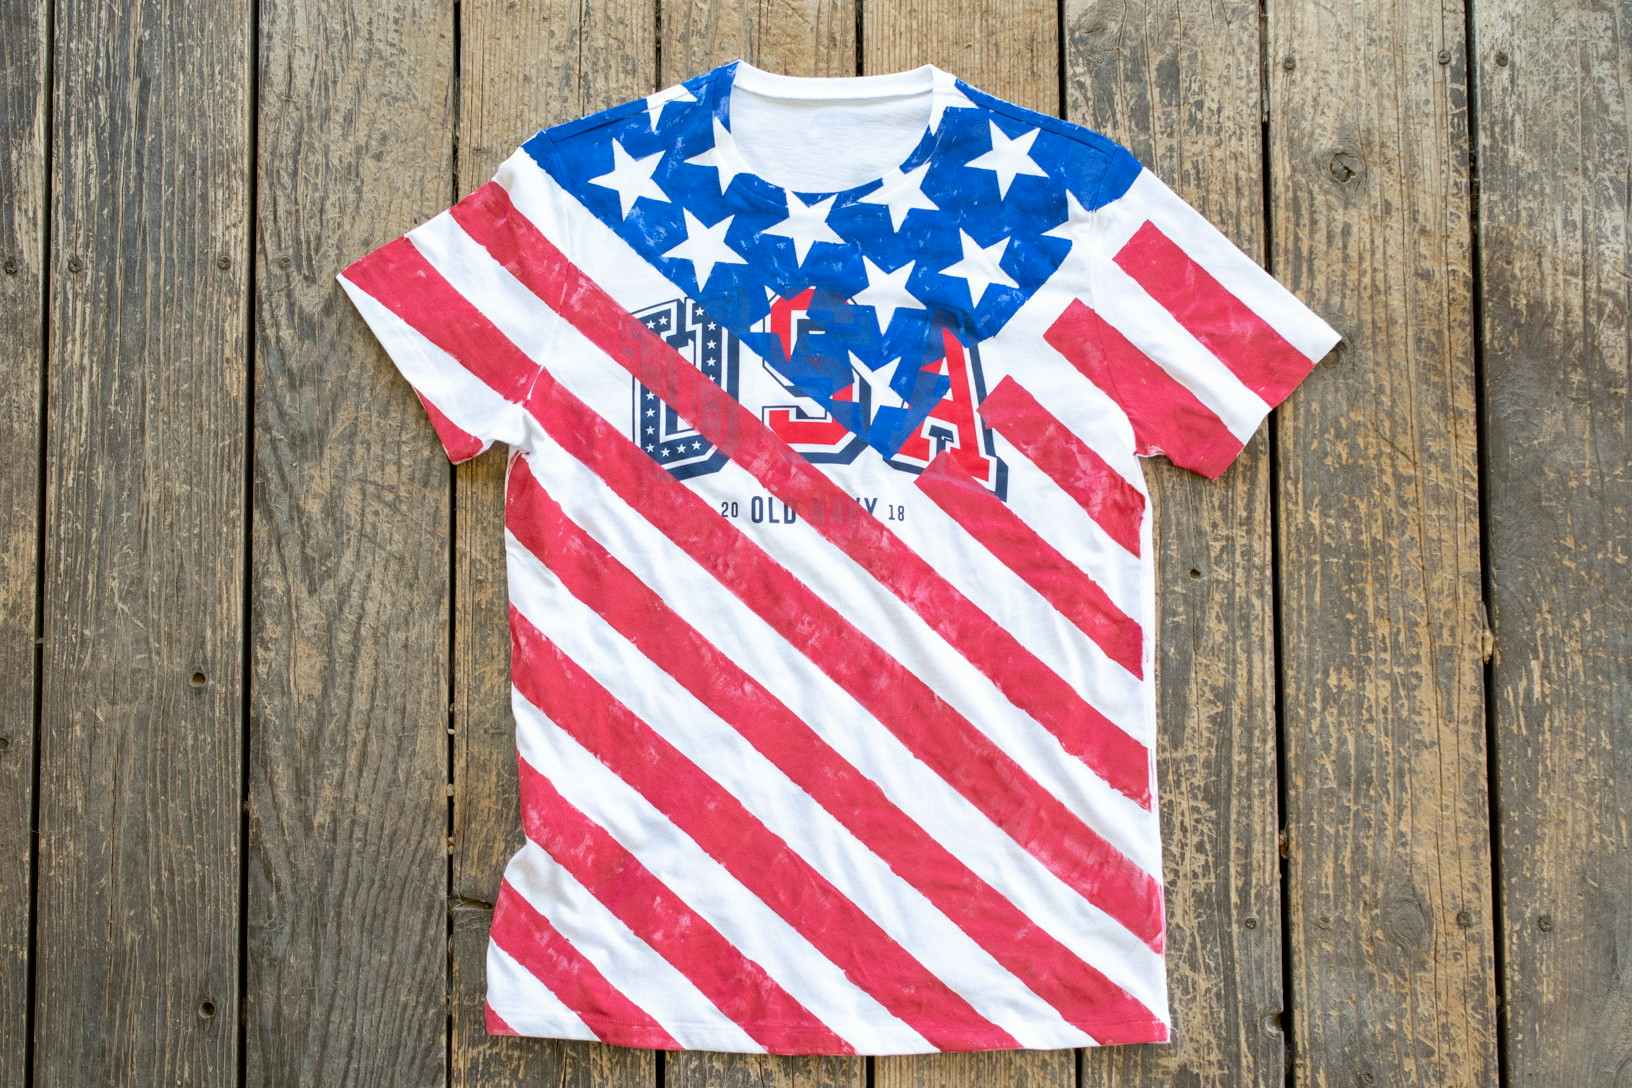 A white Old Navy USA T-shirt painted to look like the American flag laying on a wood deck.